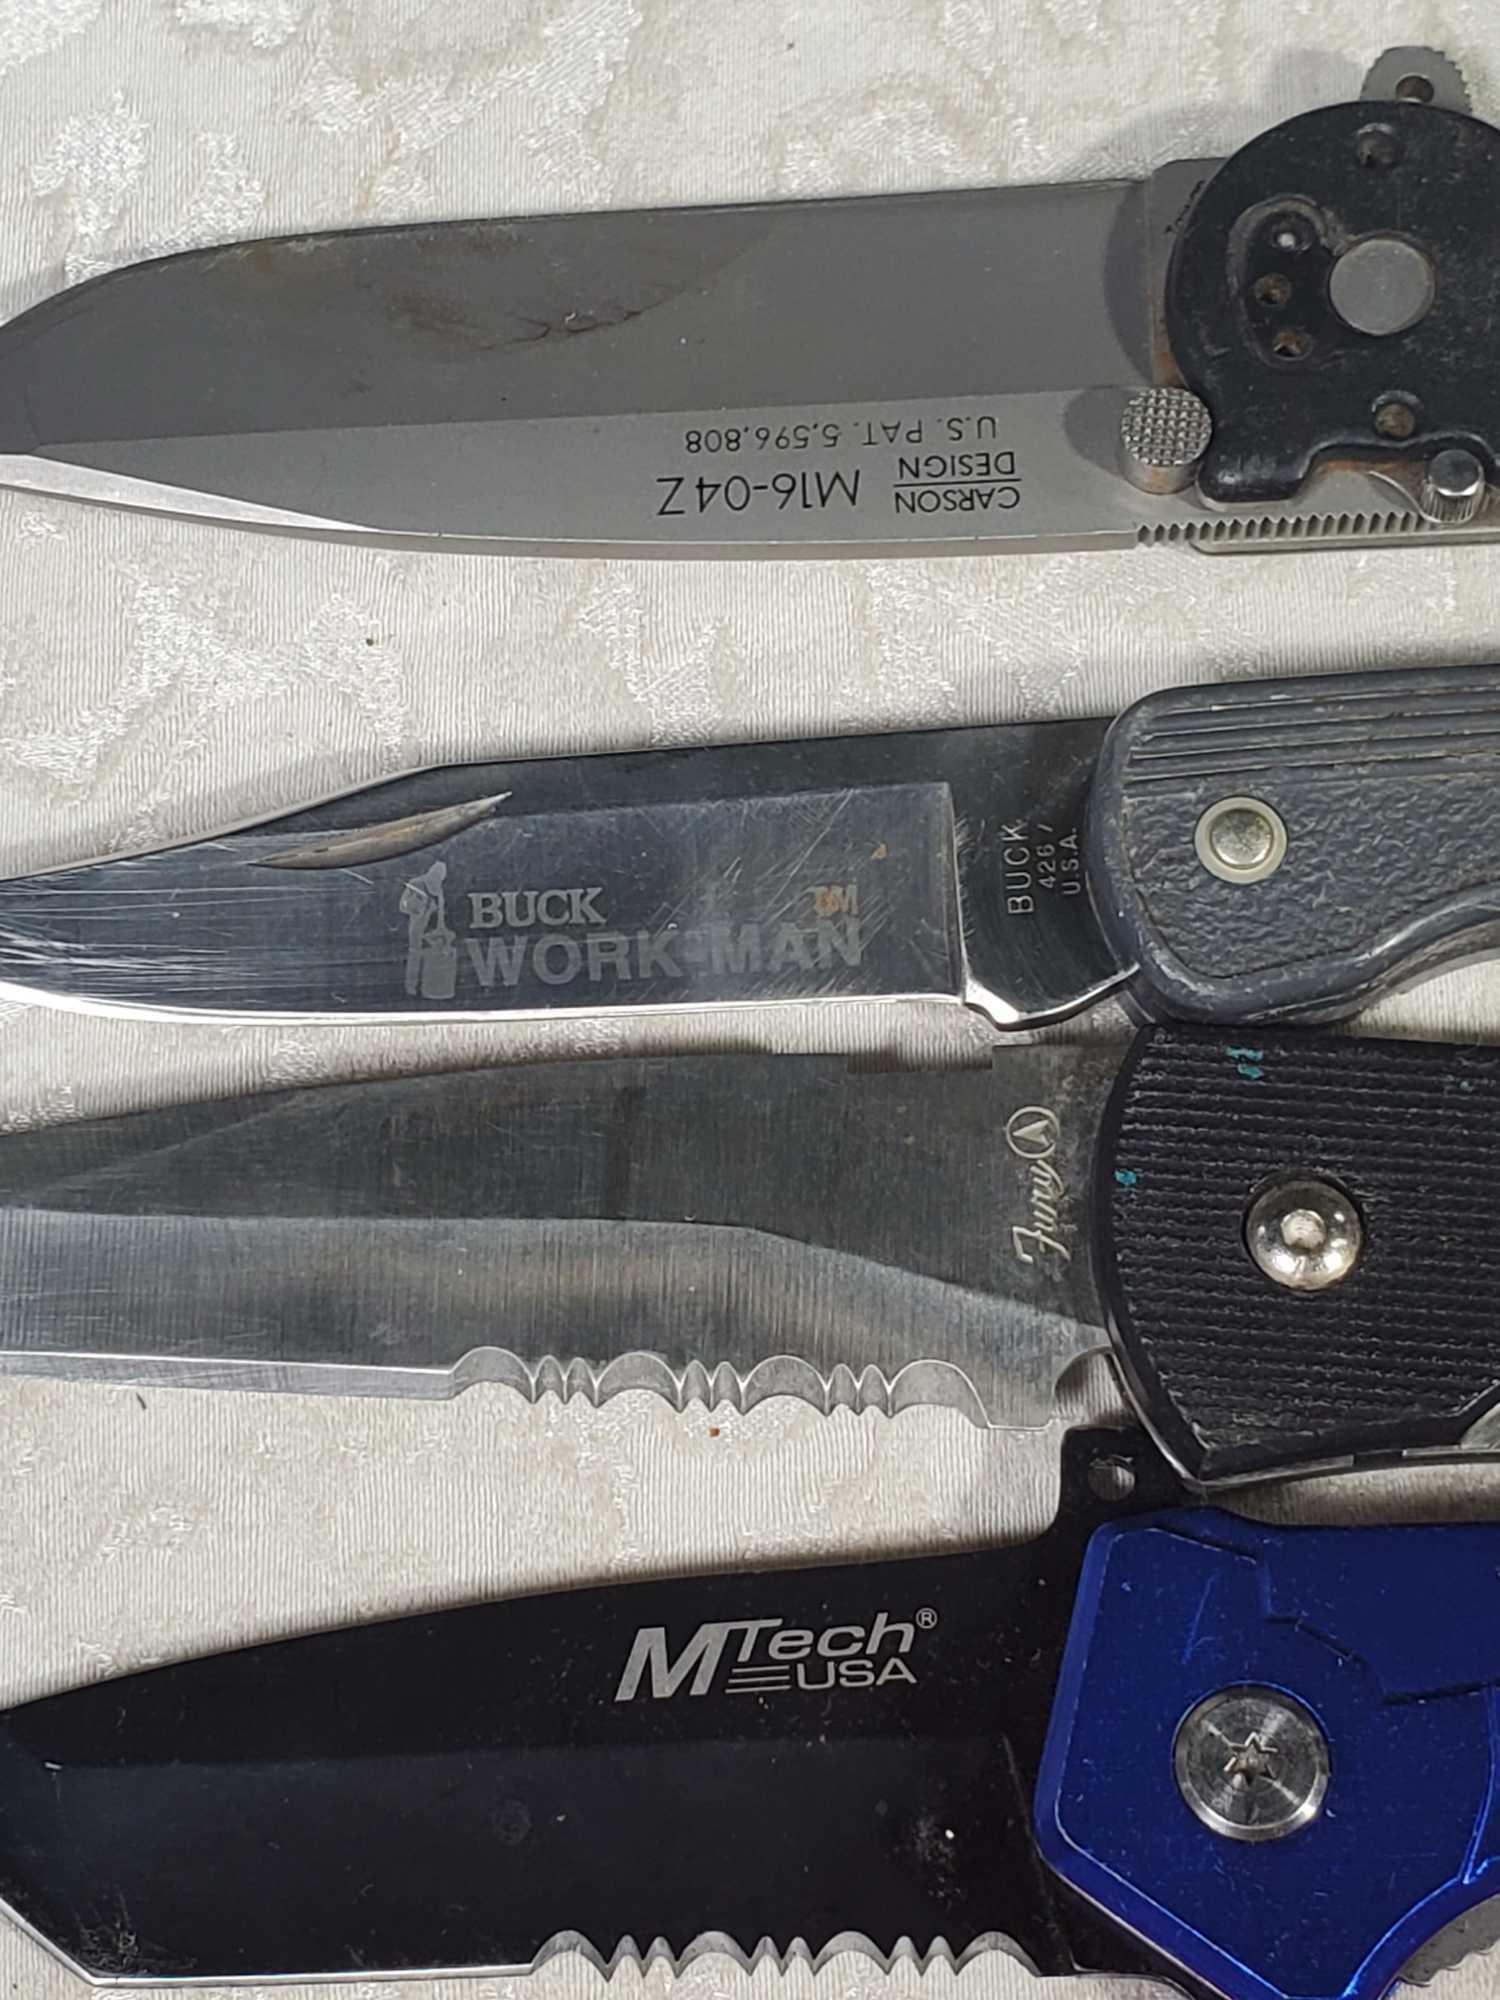 28 Misc Pocketknives, Multi Tools, Lock Blade Knives and More